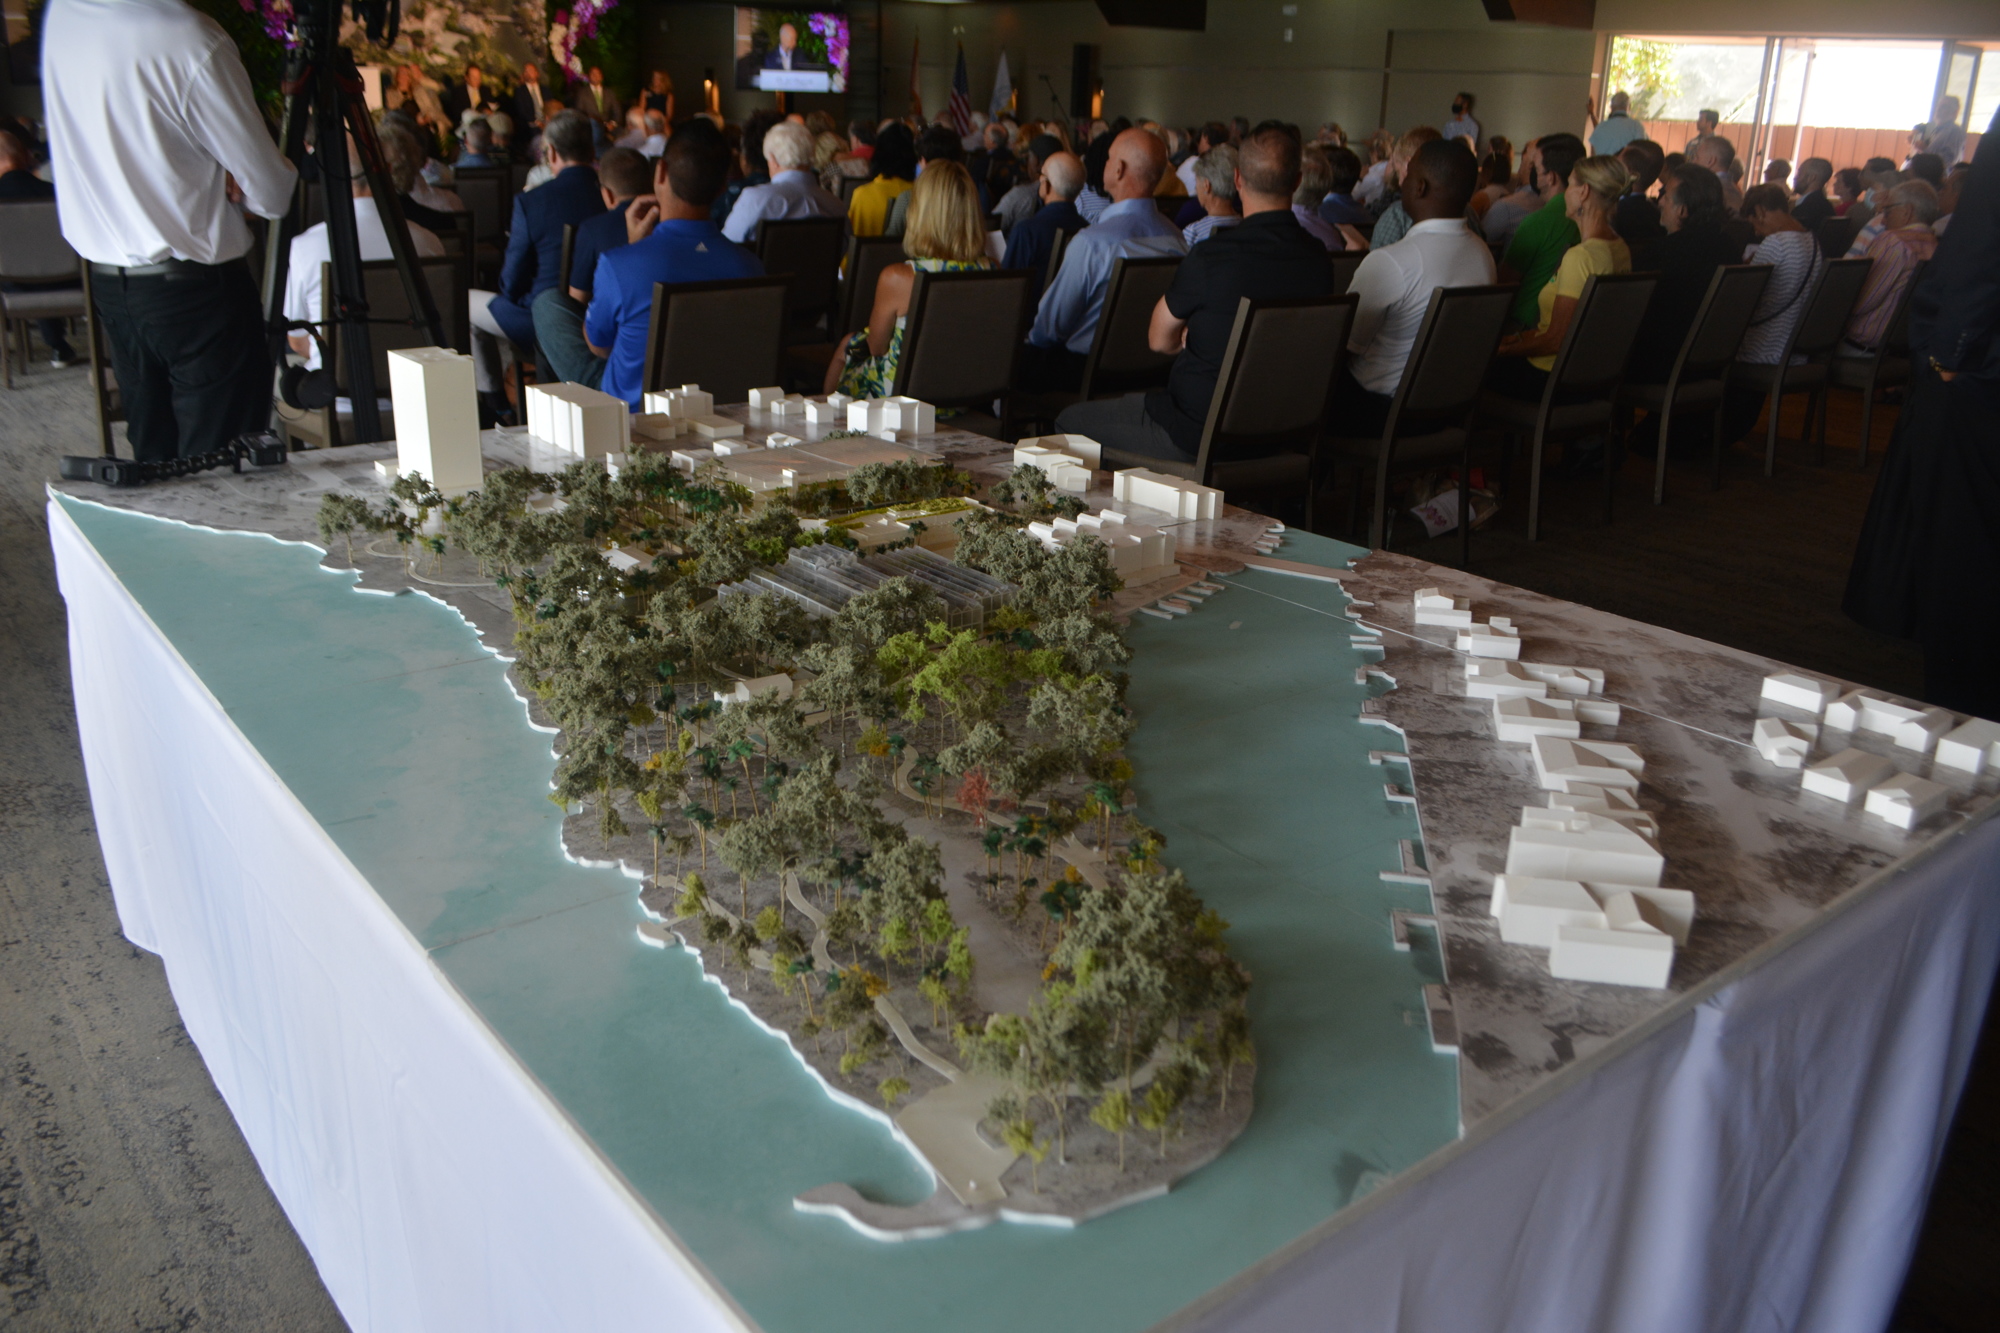 The event featured a model of what the Selby Gardens campus would look like if the master plan is fully implemented.